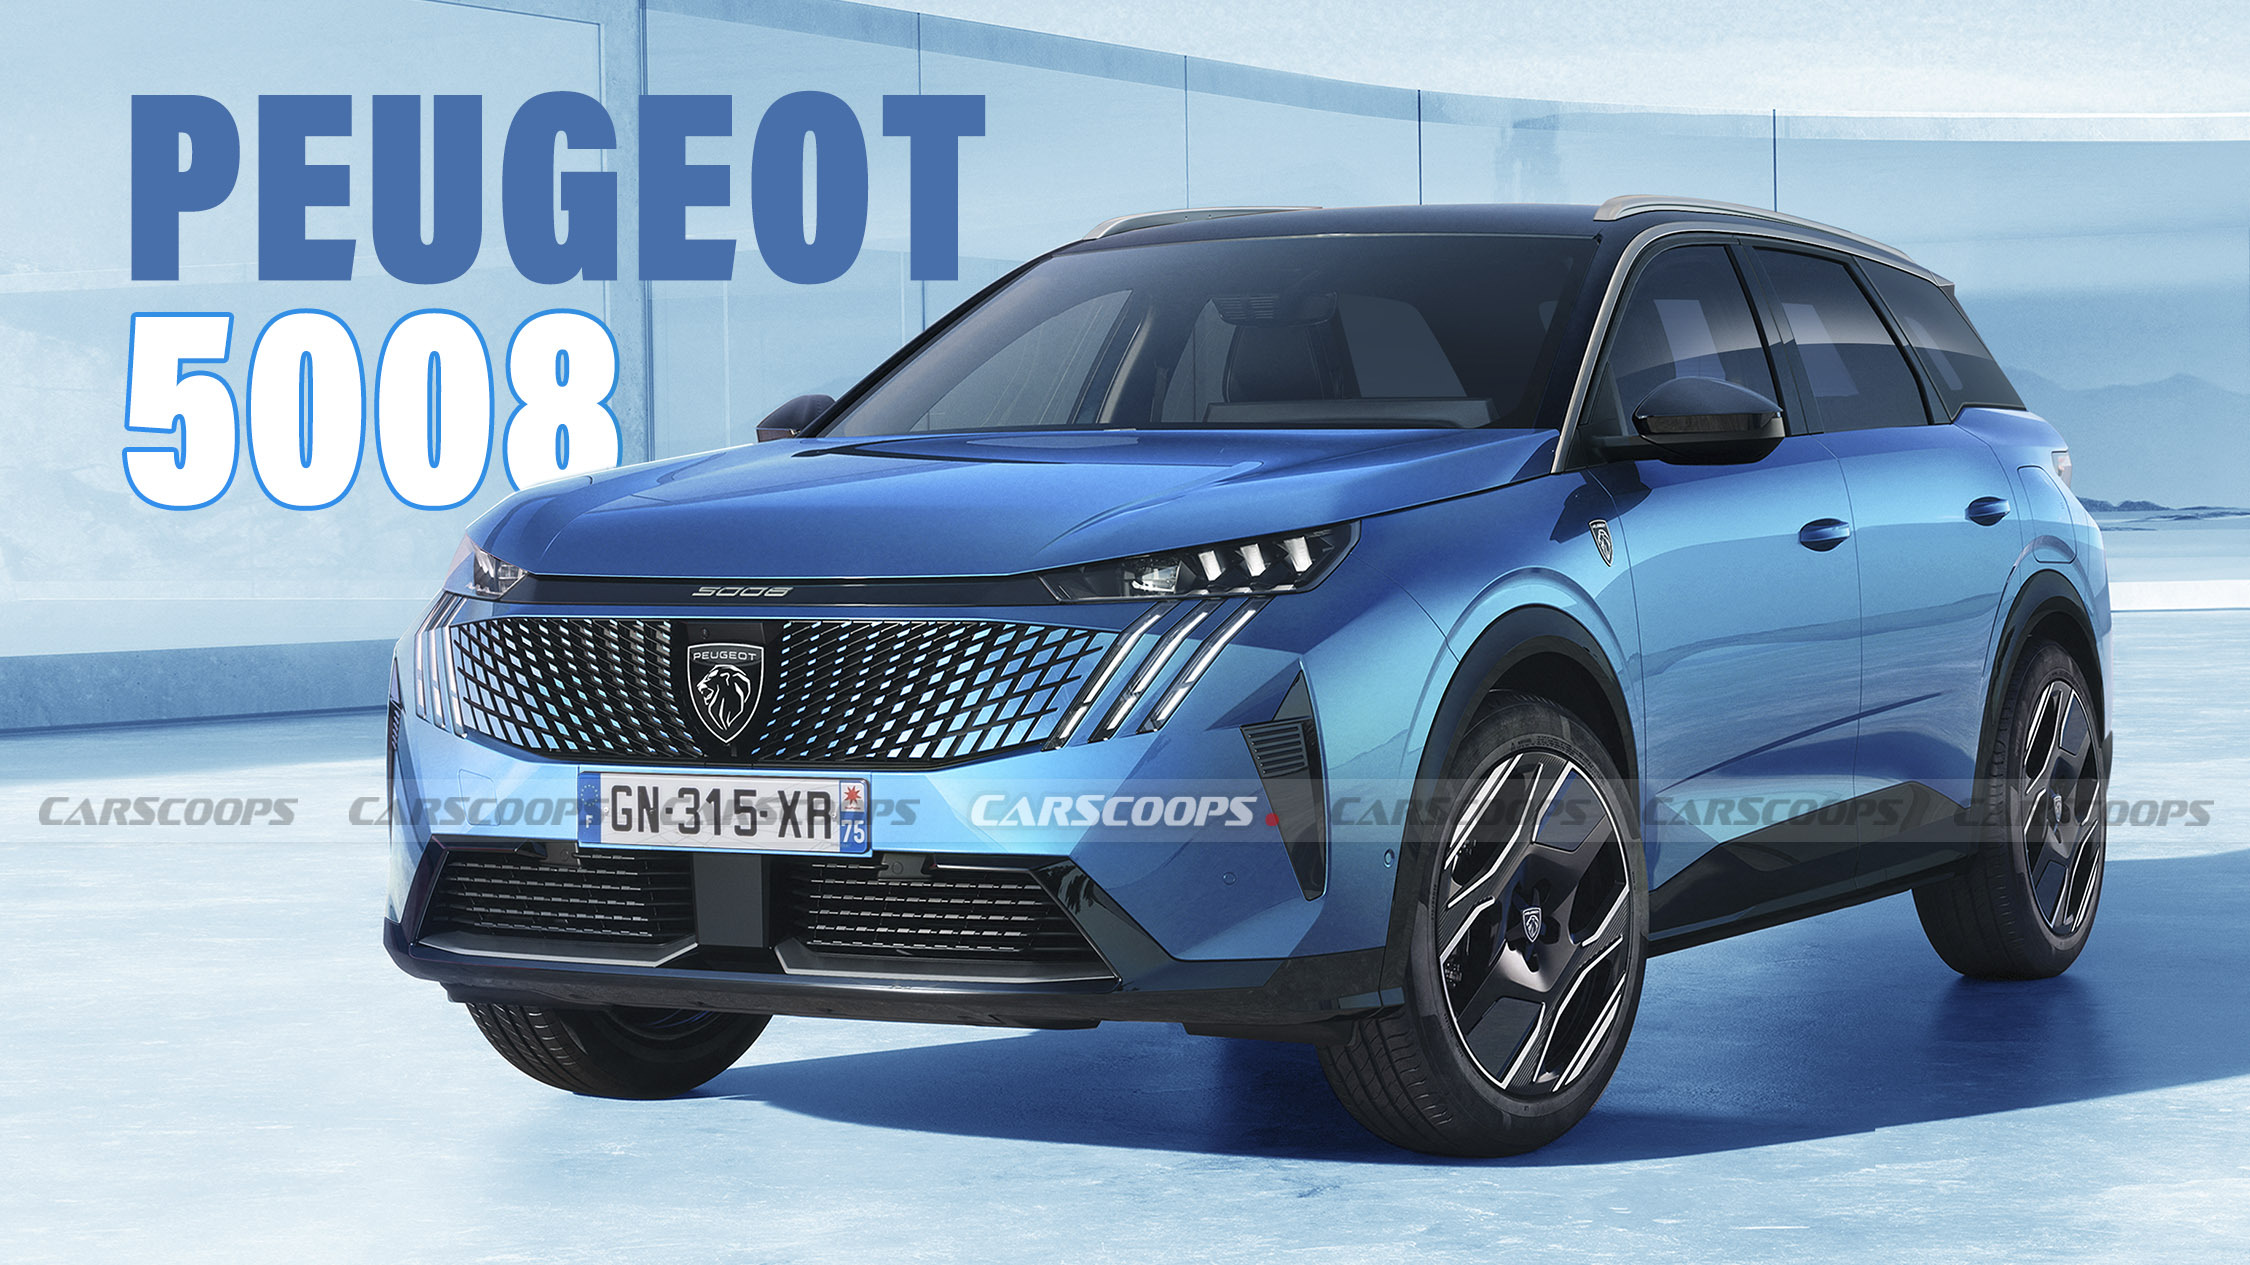 2024 Peugeot 2008 Facelift Rendered After The First Spy Photos